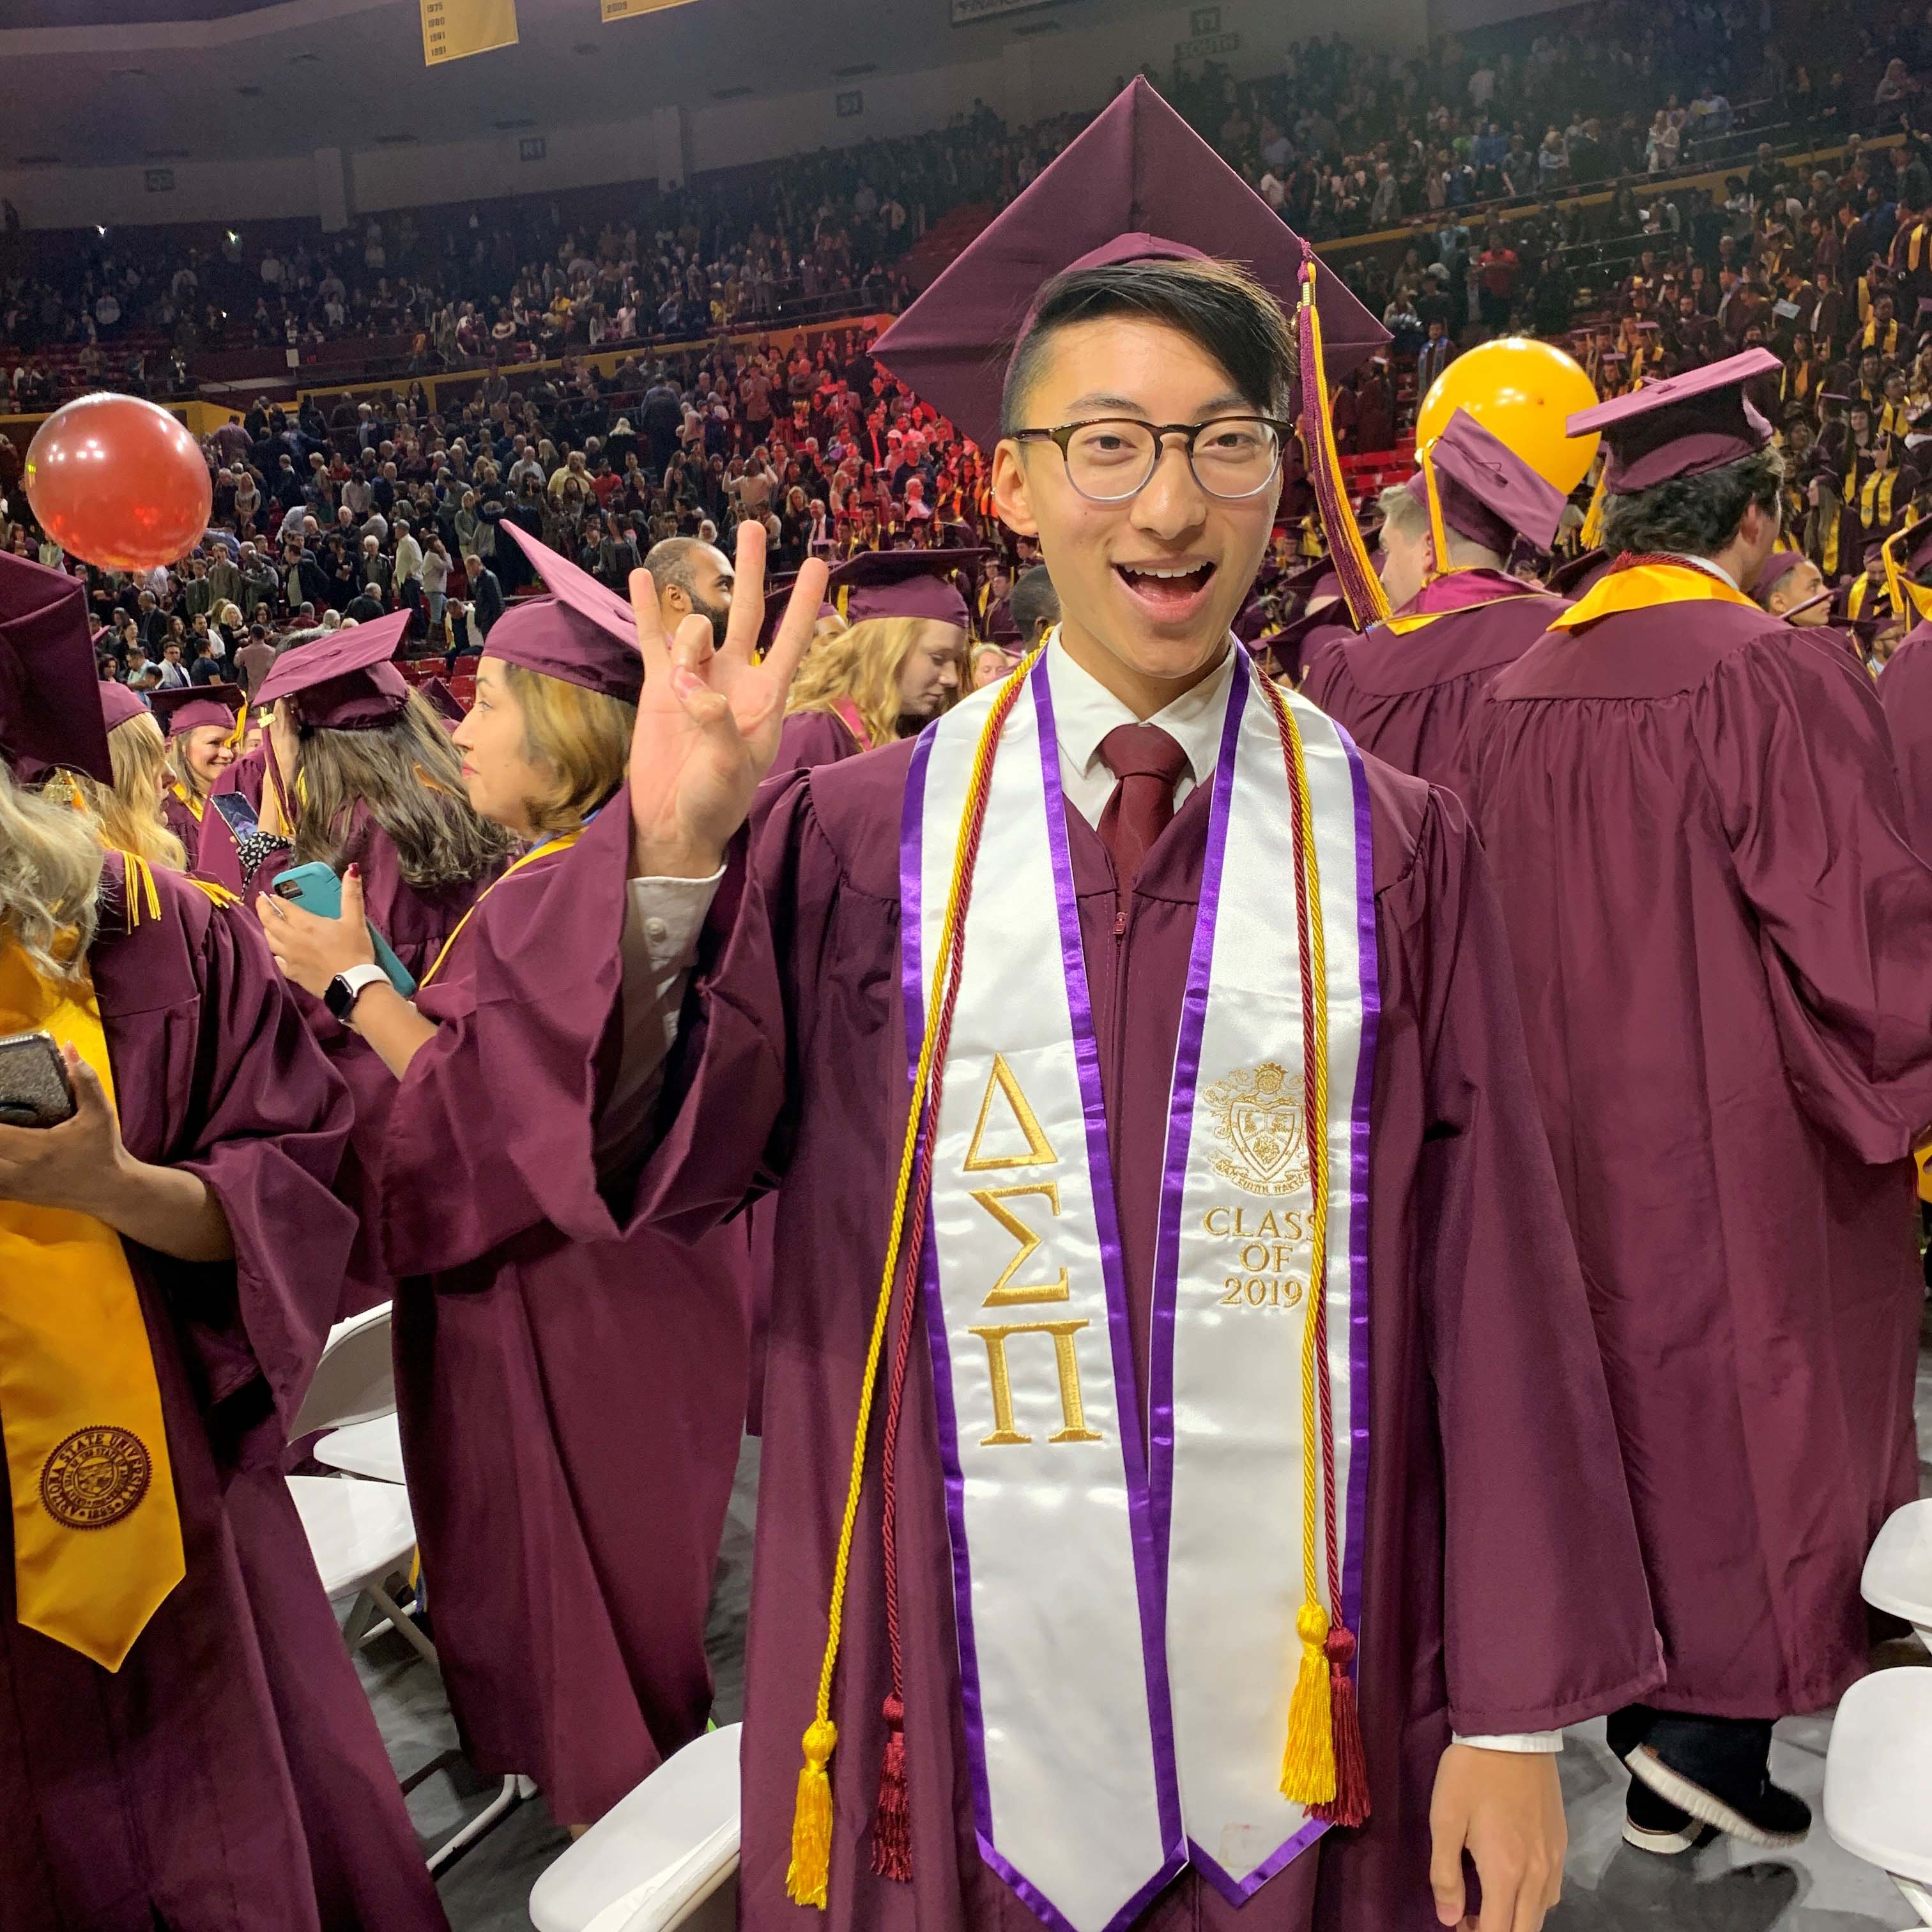 Bryan Pietsch doing a forks up symbol in his cap and gown at ASU graduation